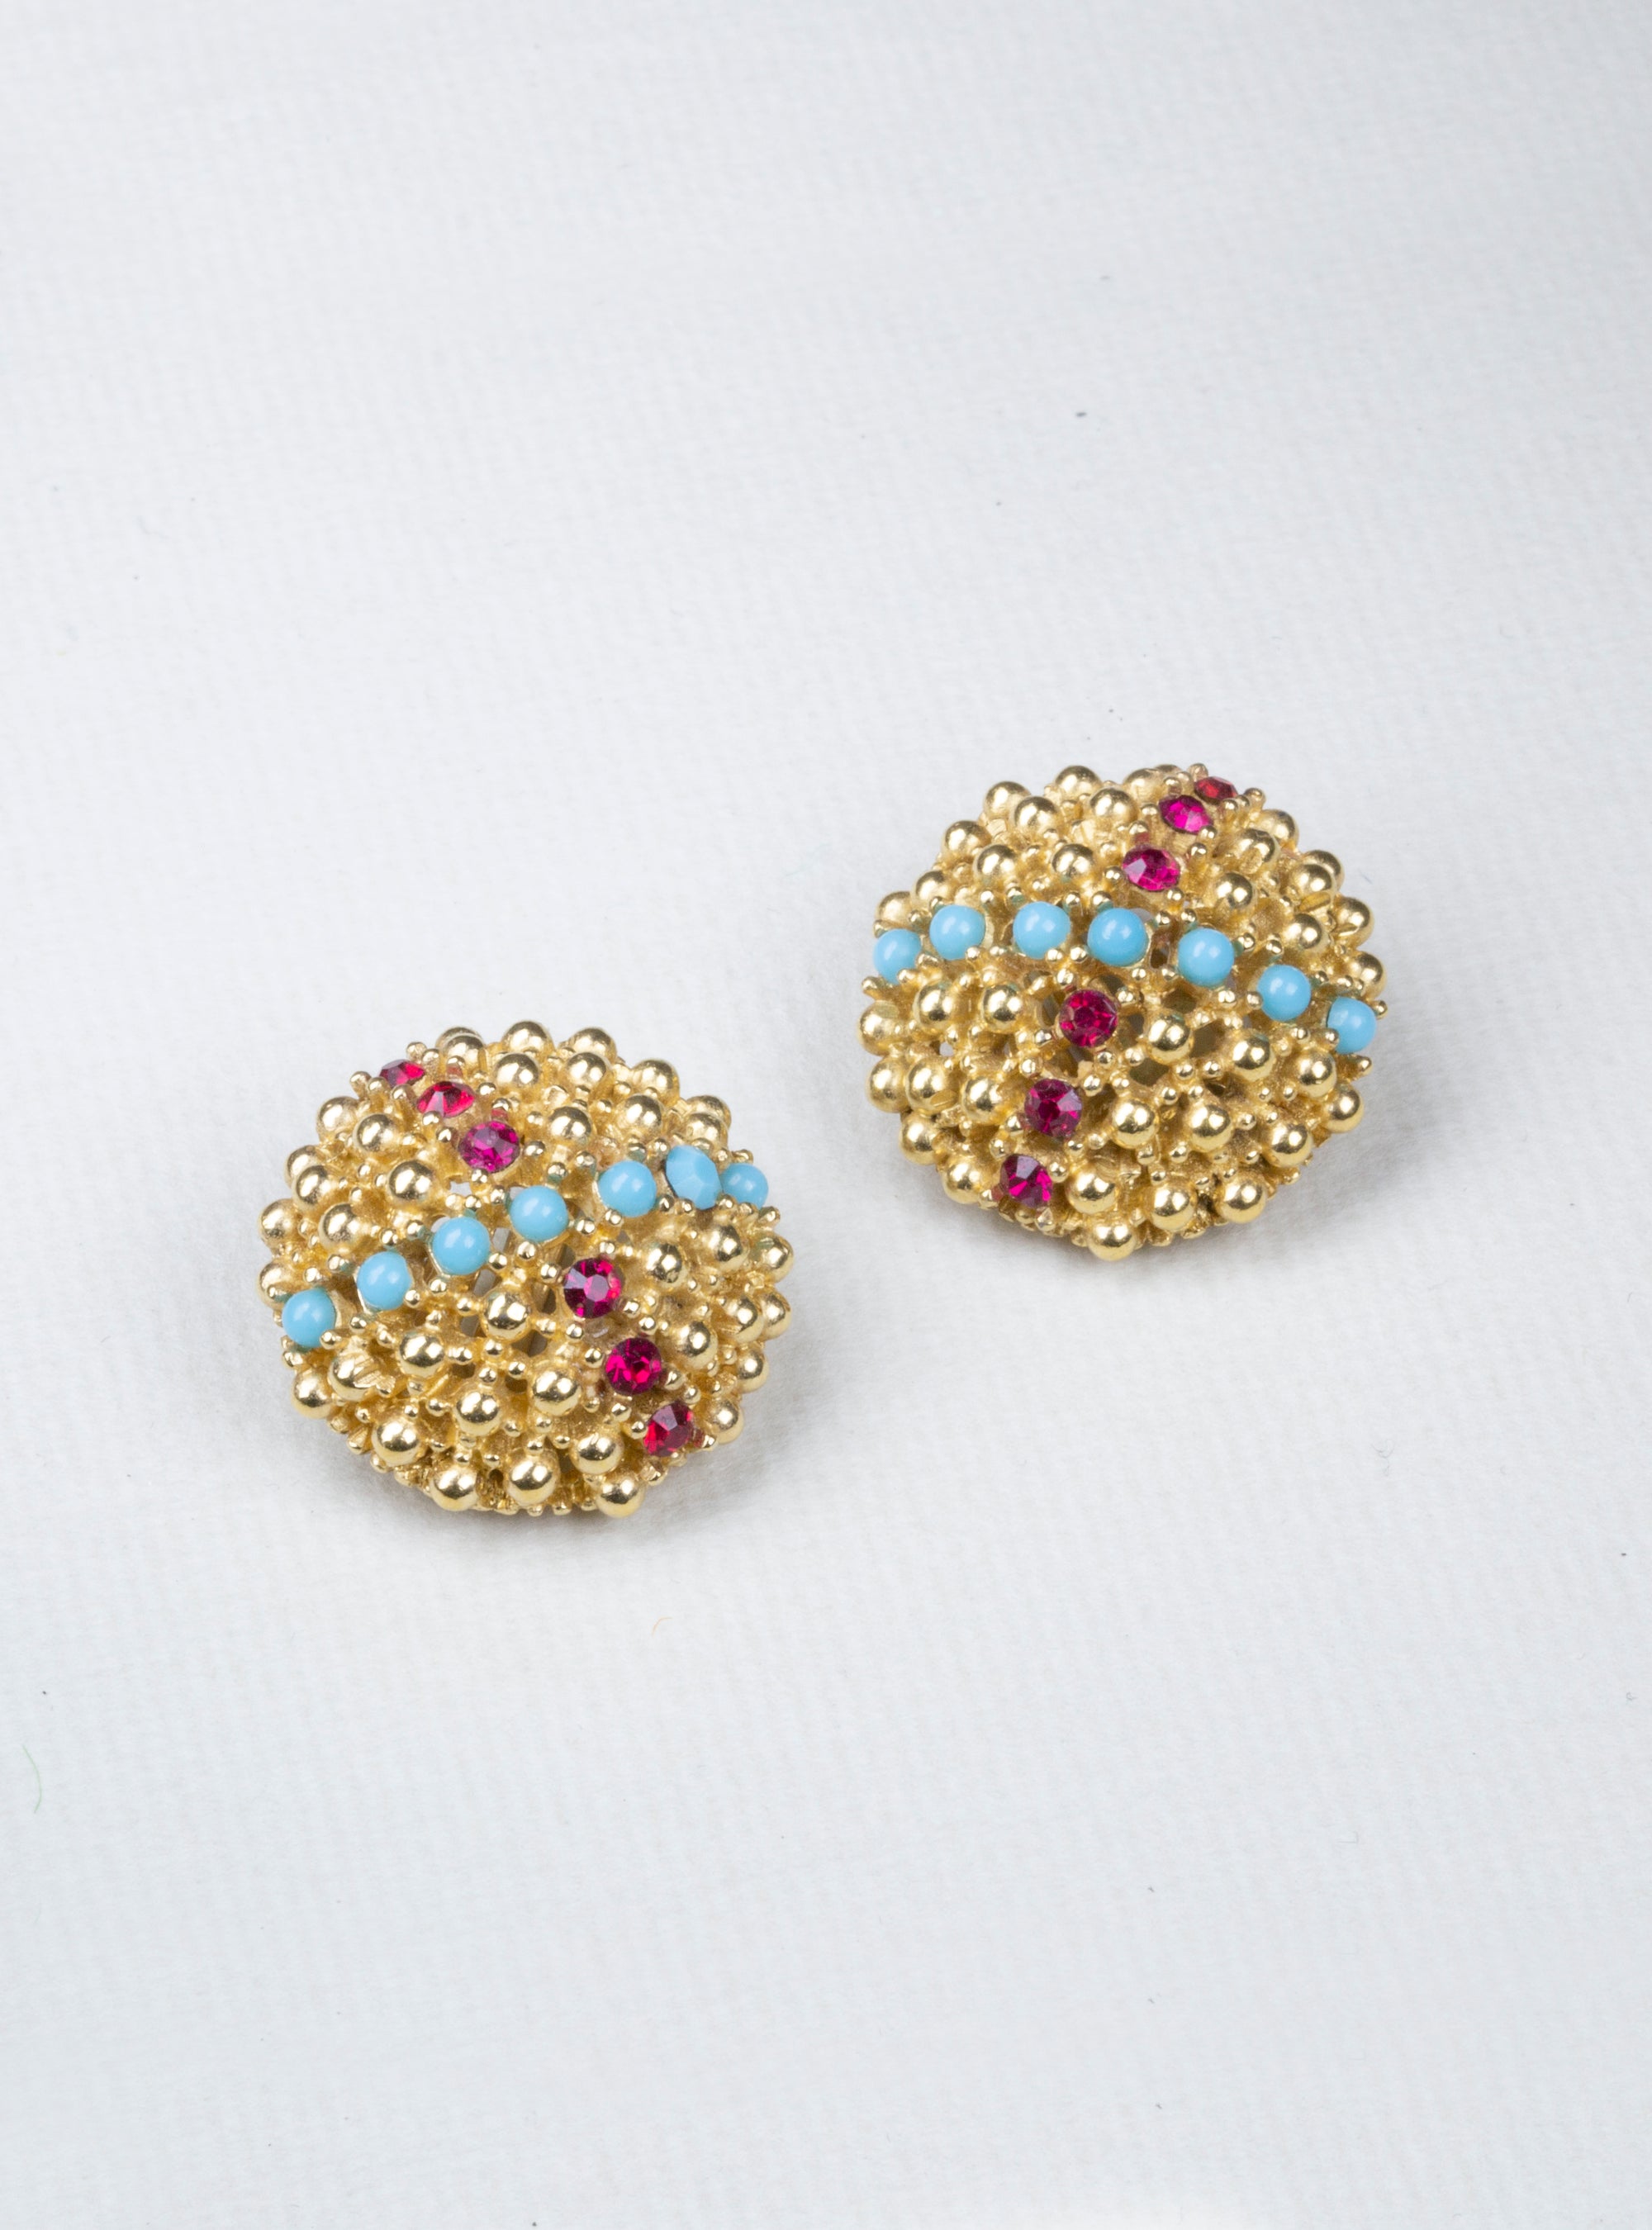 Vintage Gold Clip-on Earrings with Red Rhinestones and Blue Beads